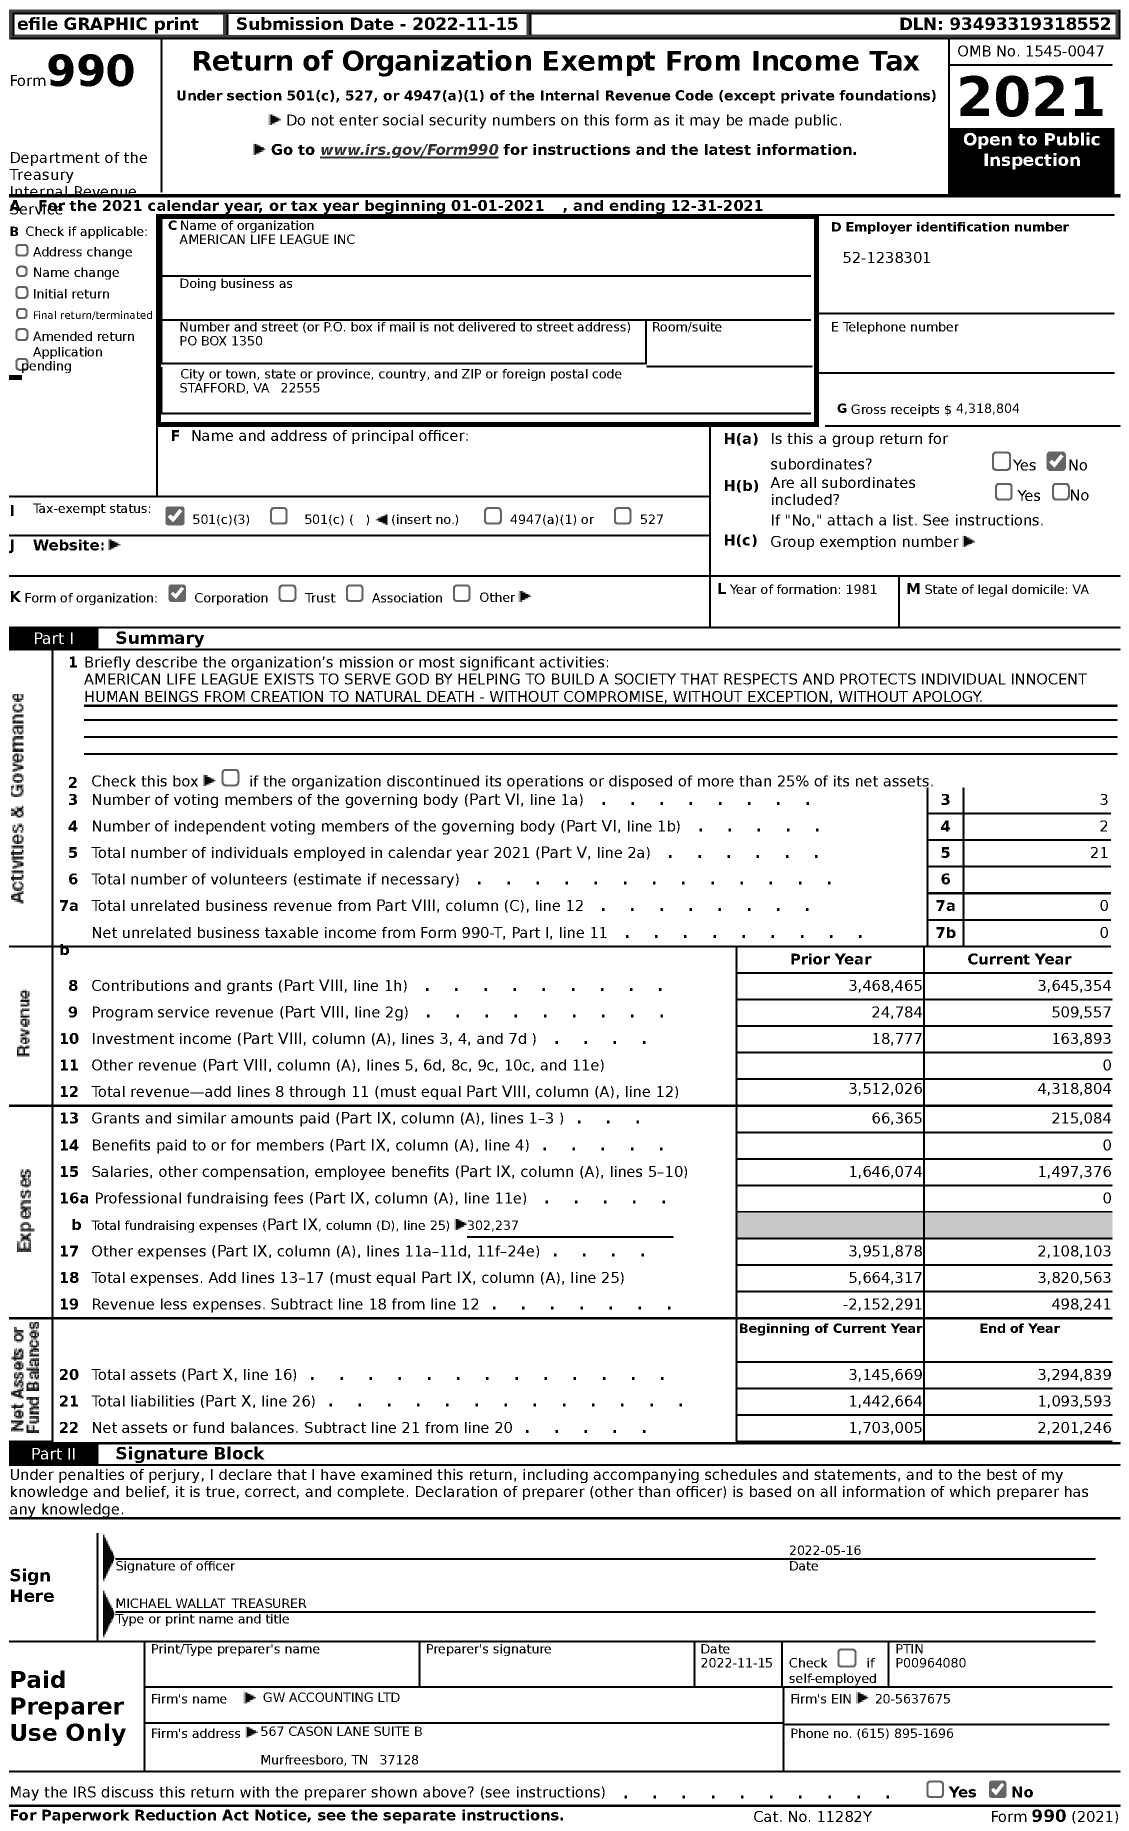 Image of first page of 2021 Form 990 for American Life League (ALL)